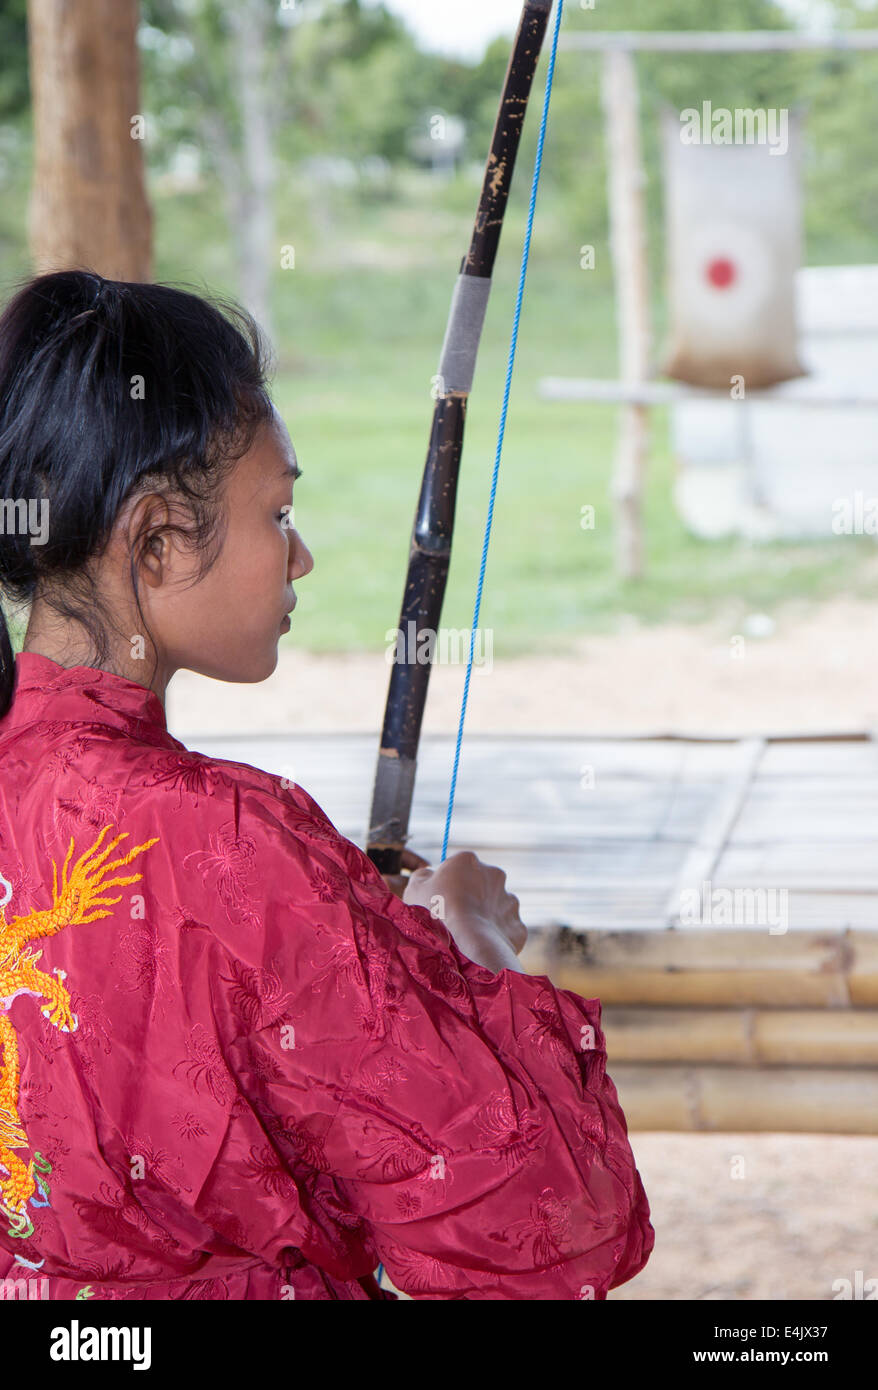 young Asian woman practicing archery Stock Photo